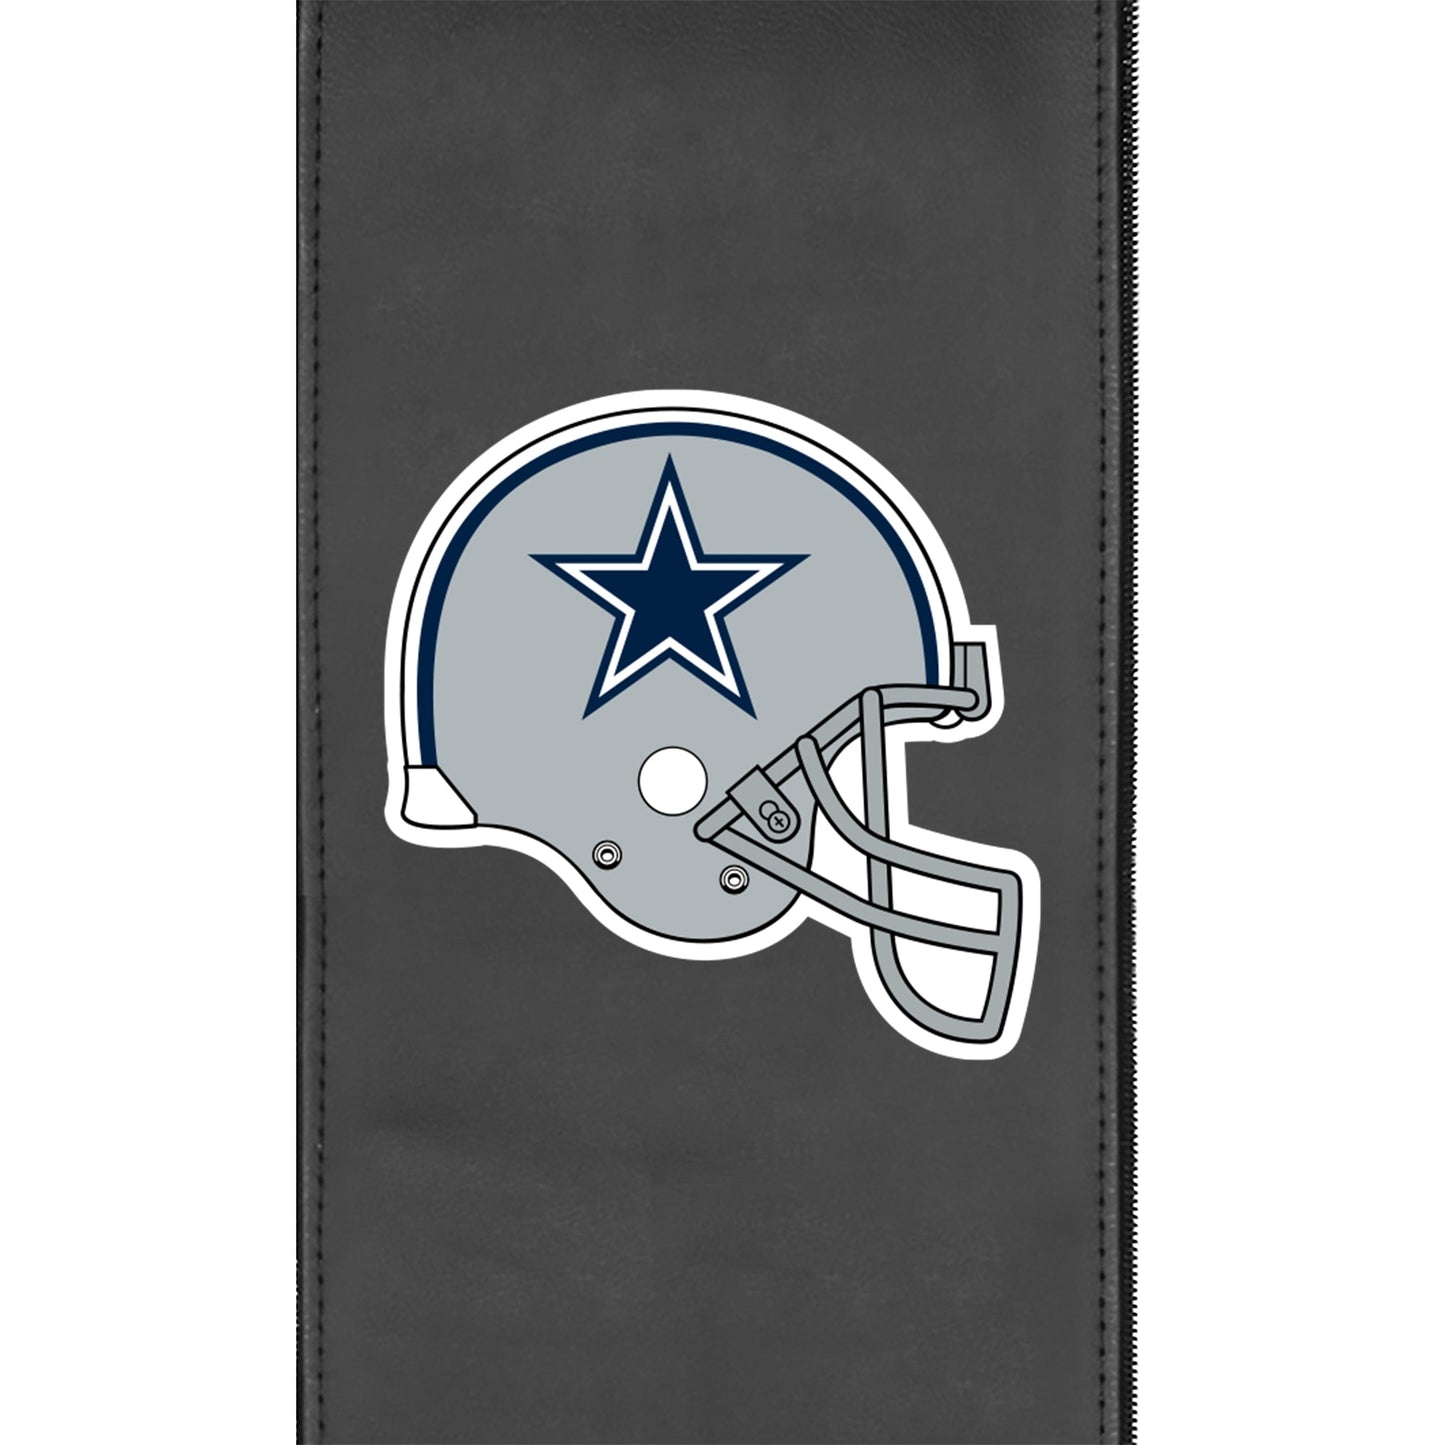 Relax Home Theater Recliner with  Dallas Cowboys Helmet Logo